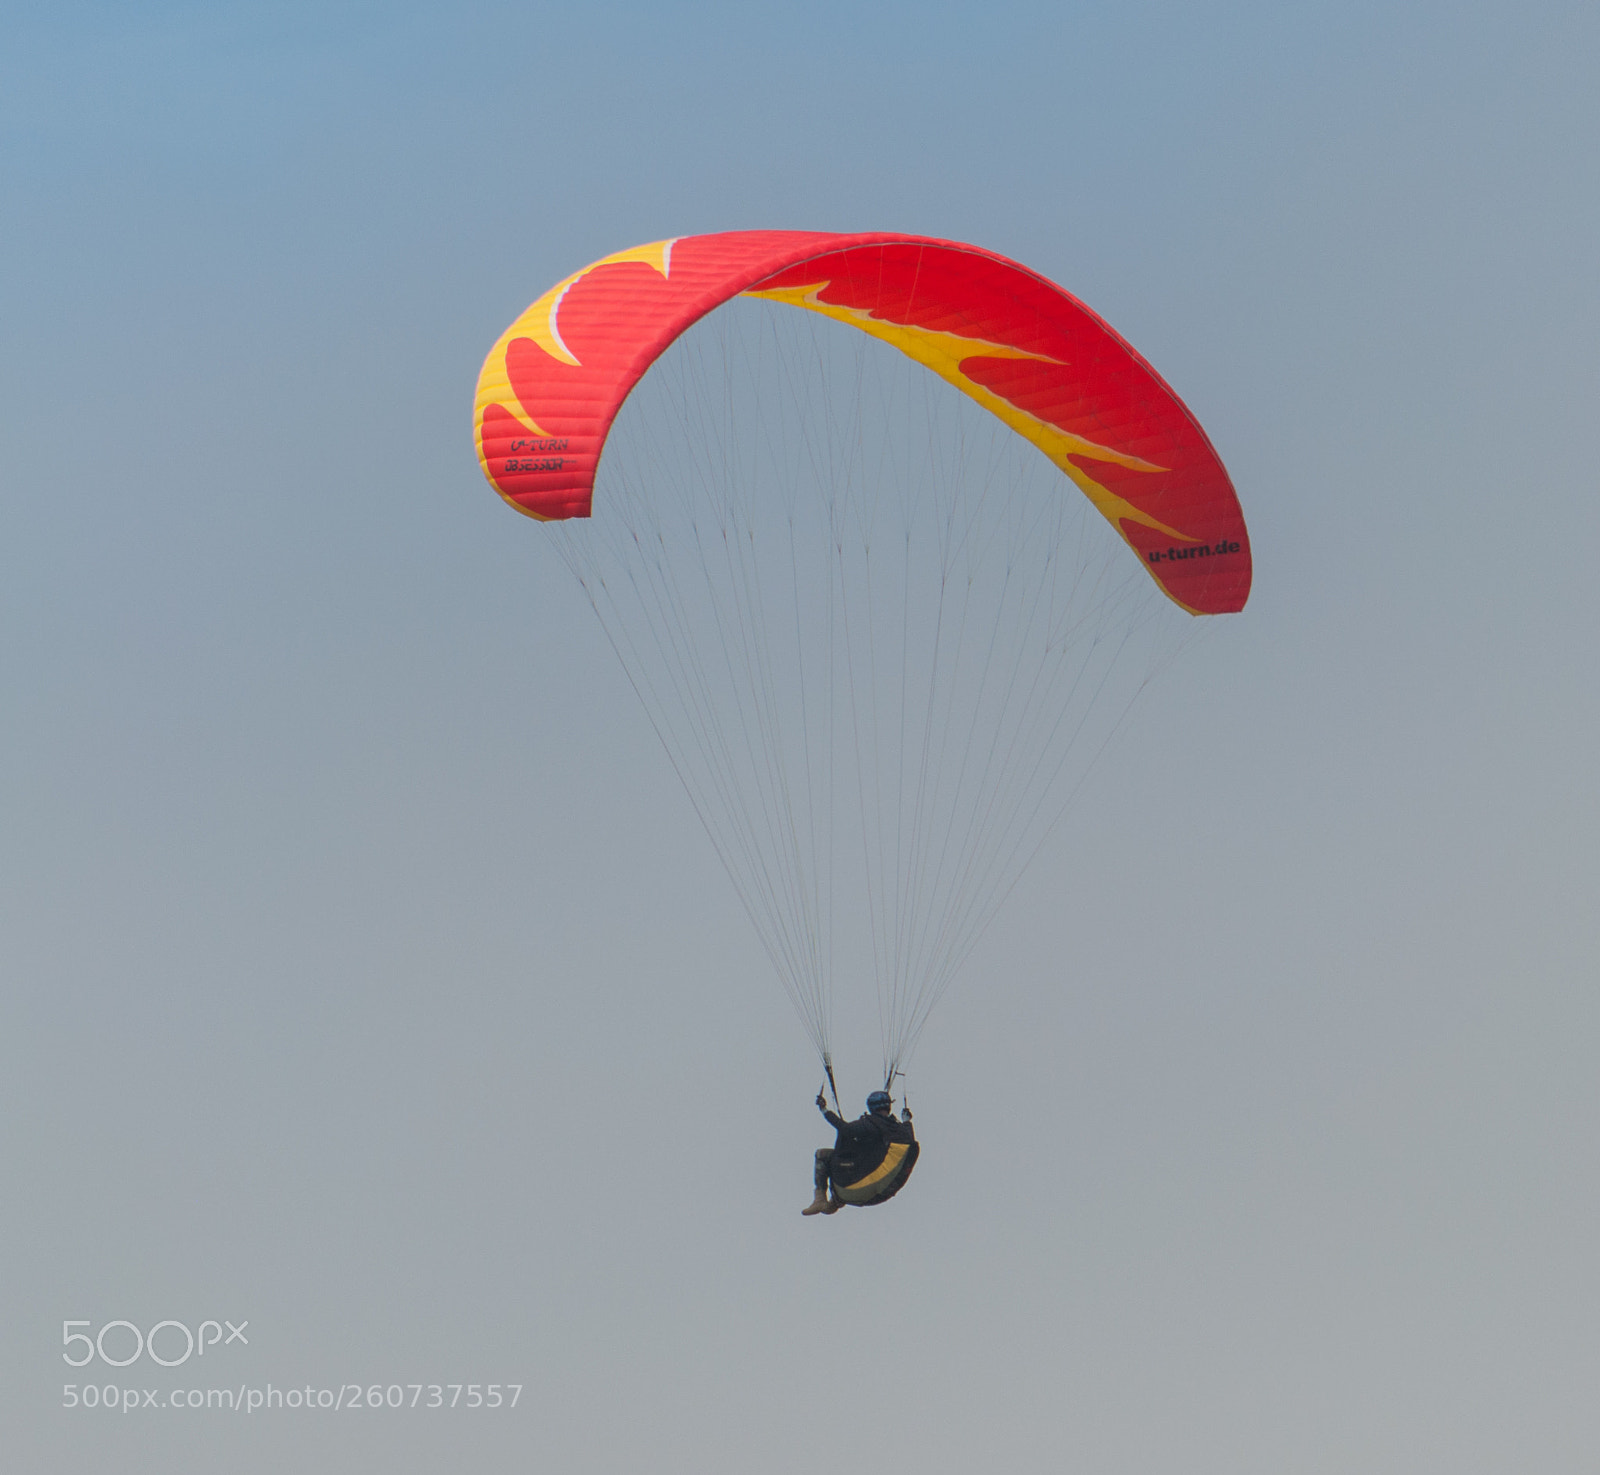 Nikon D90 sample photo. Red and yellow paraglider photography